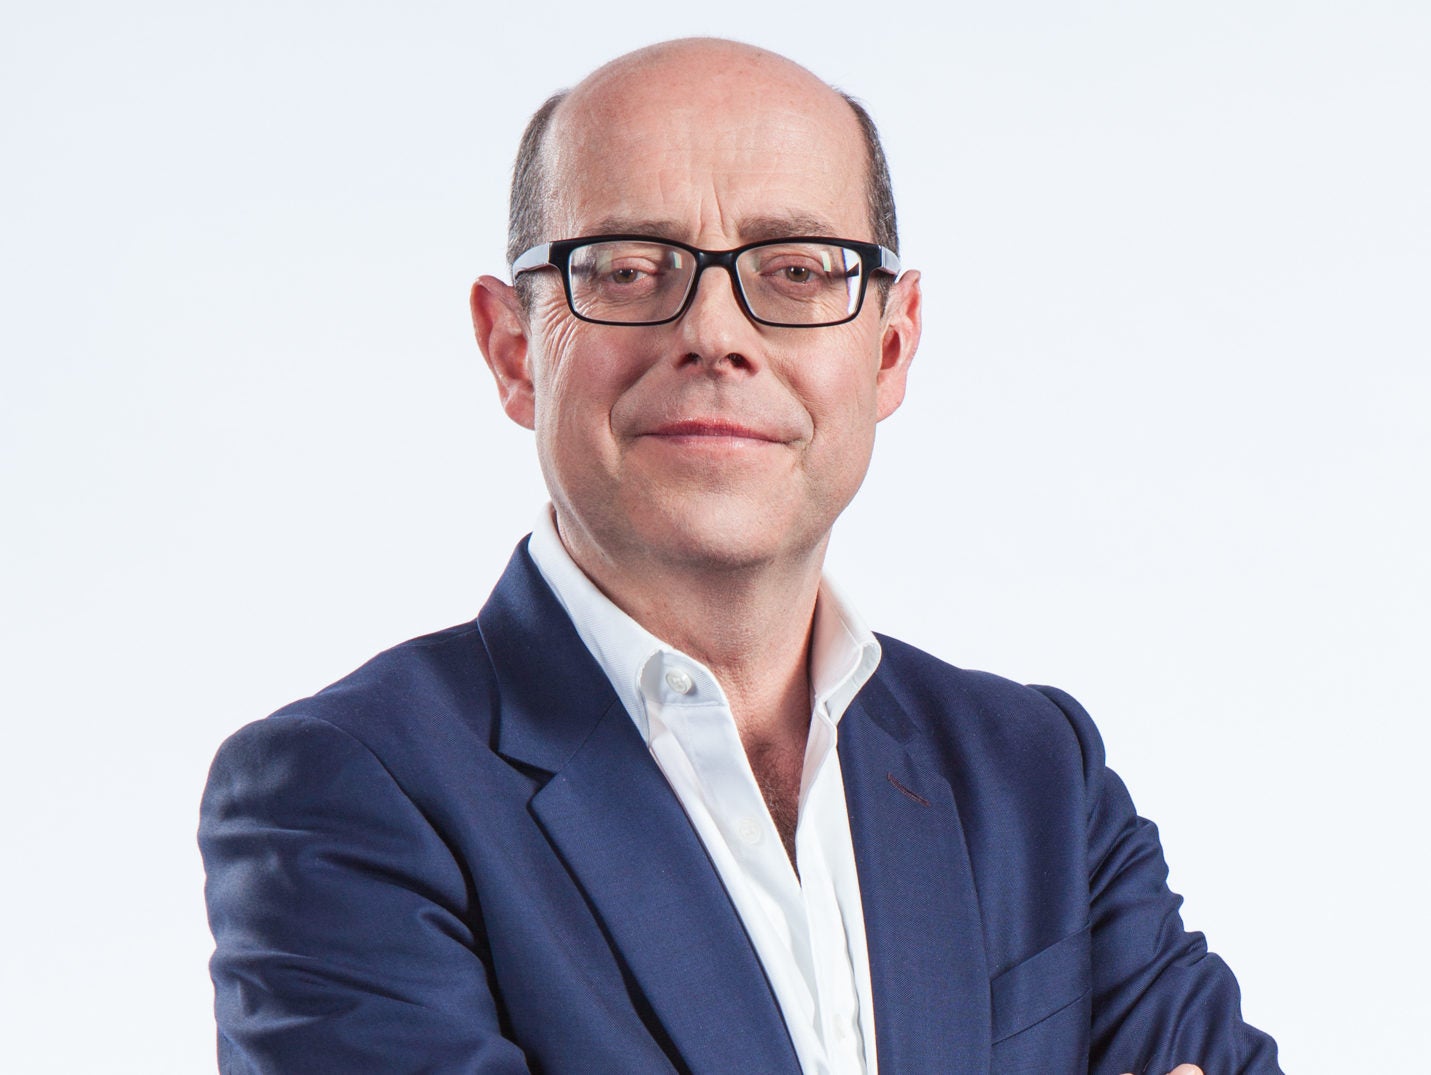 Nick Robinson's Steve Hewlett Memorial Lecture: We need to 're-make the case for impartiality' in the news media